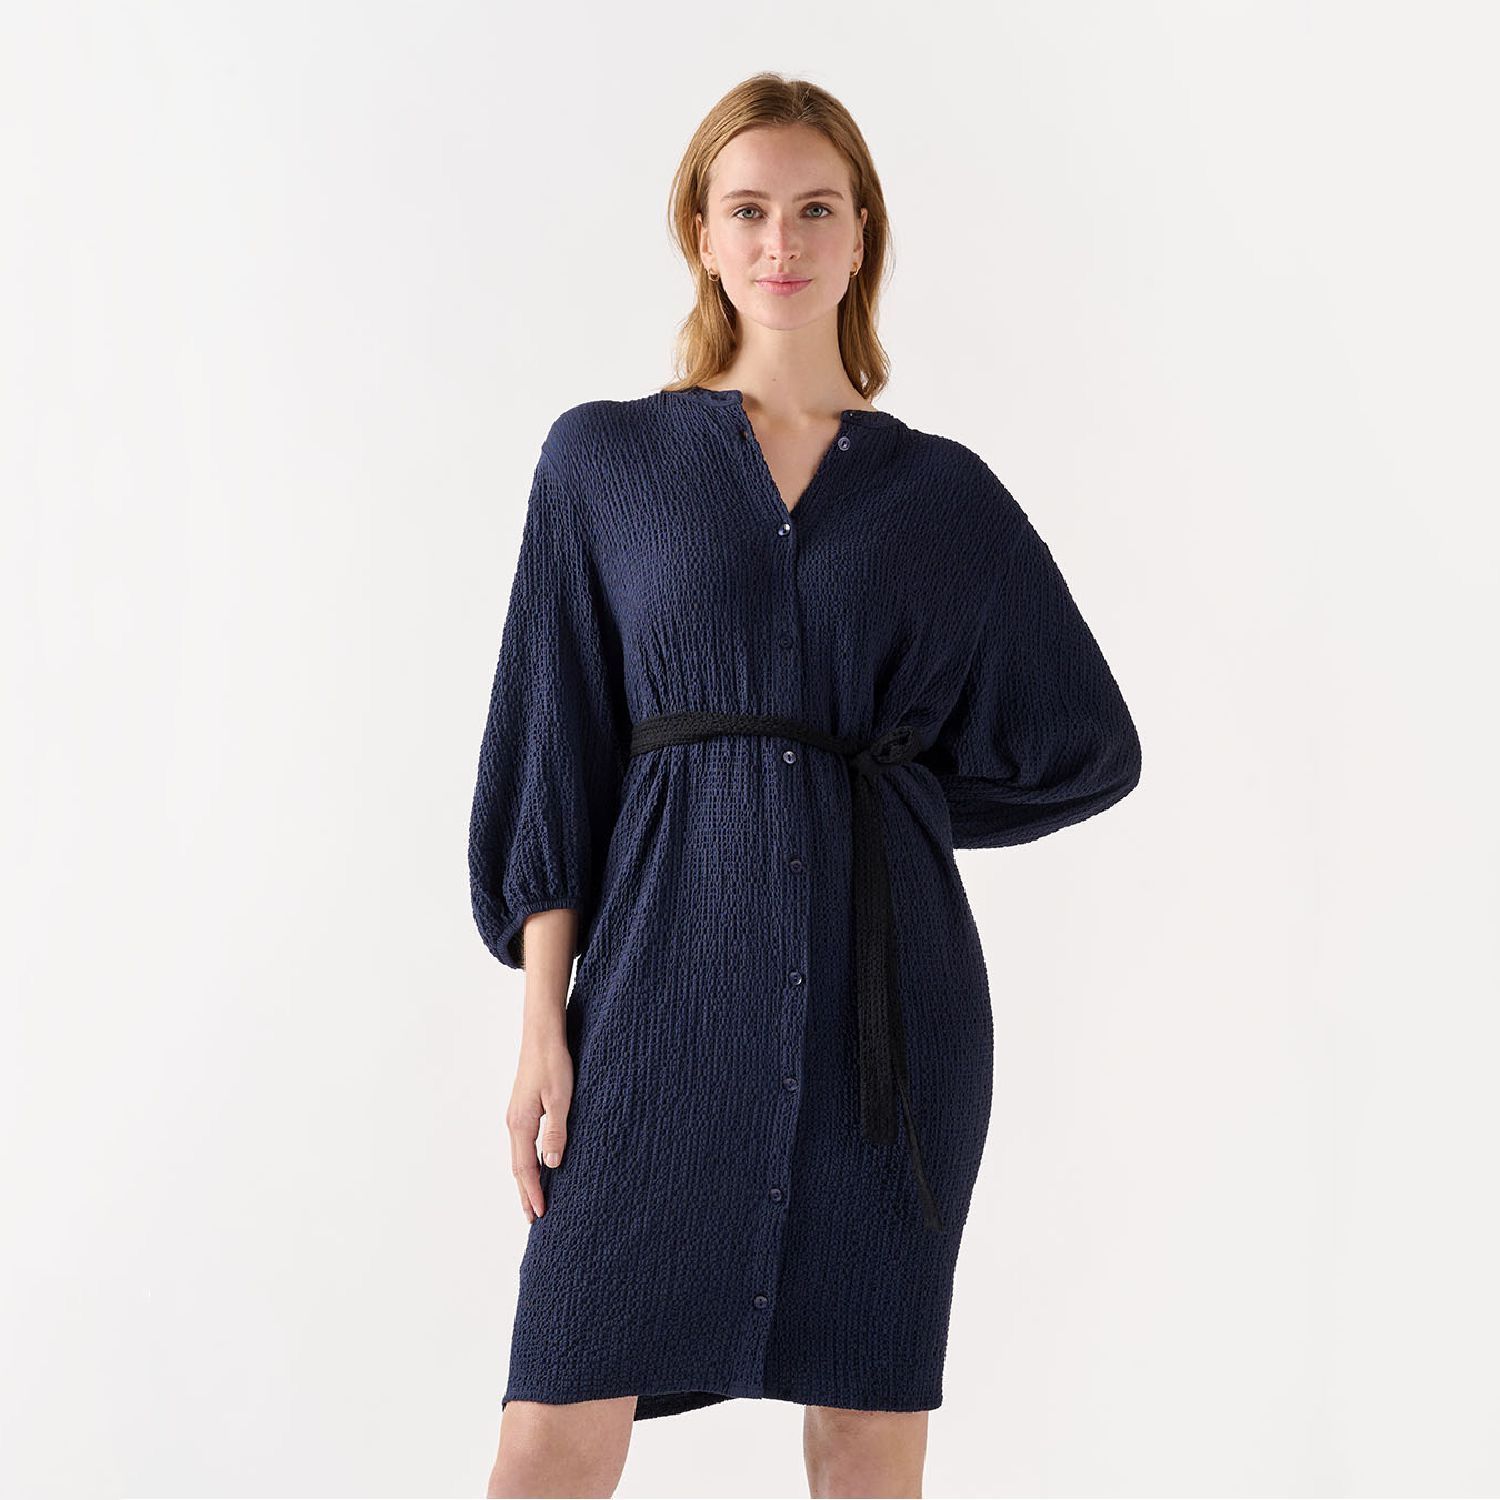 Amani dress s/s Night Sky | Another Label